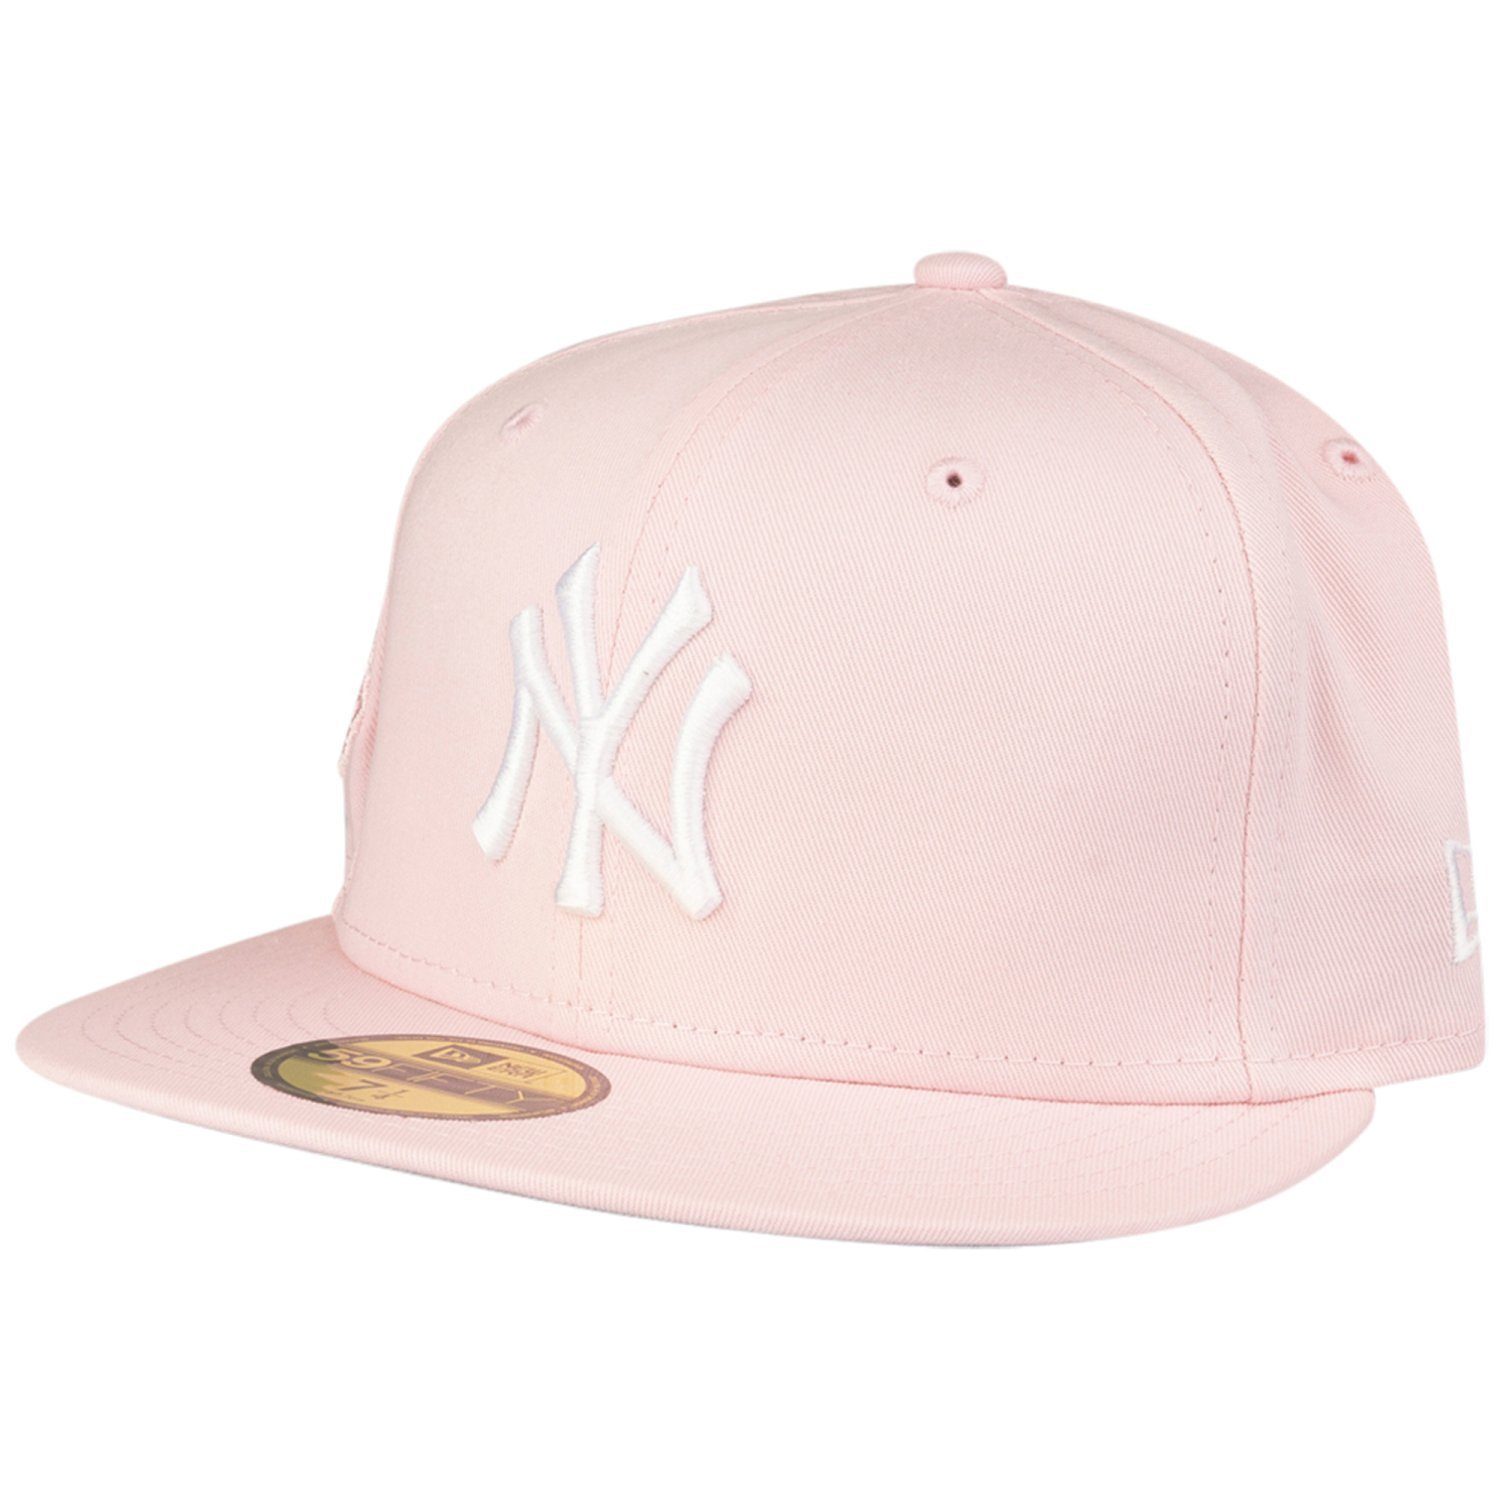 New Era ANNIVERSARY 100 Yankees Cap 59Fifty Fitted NY